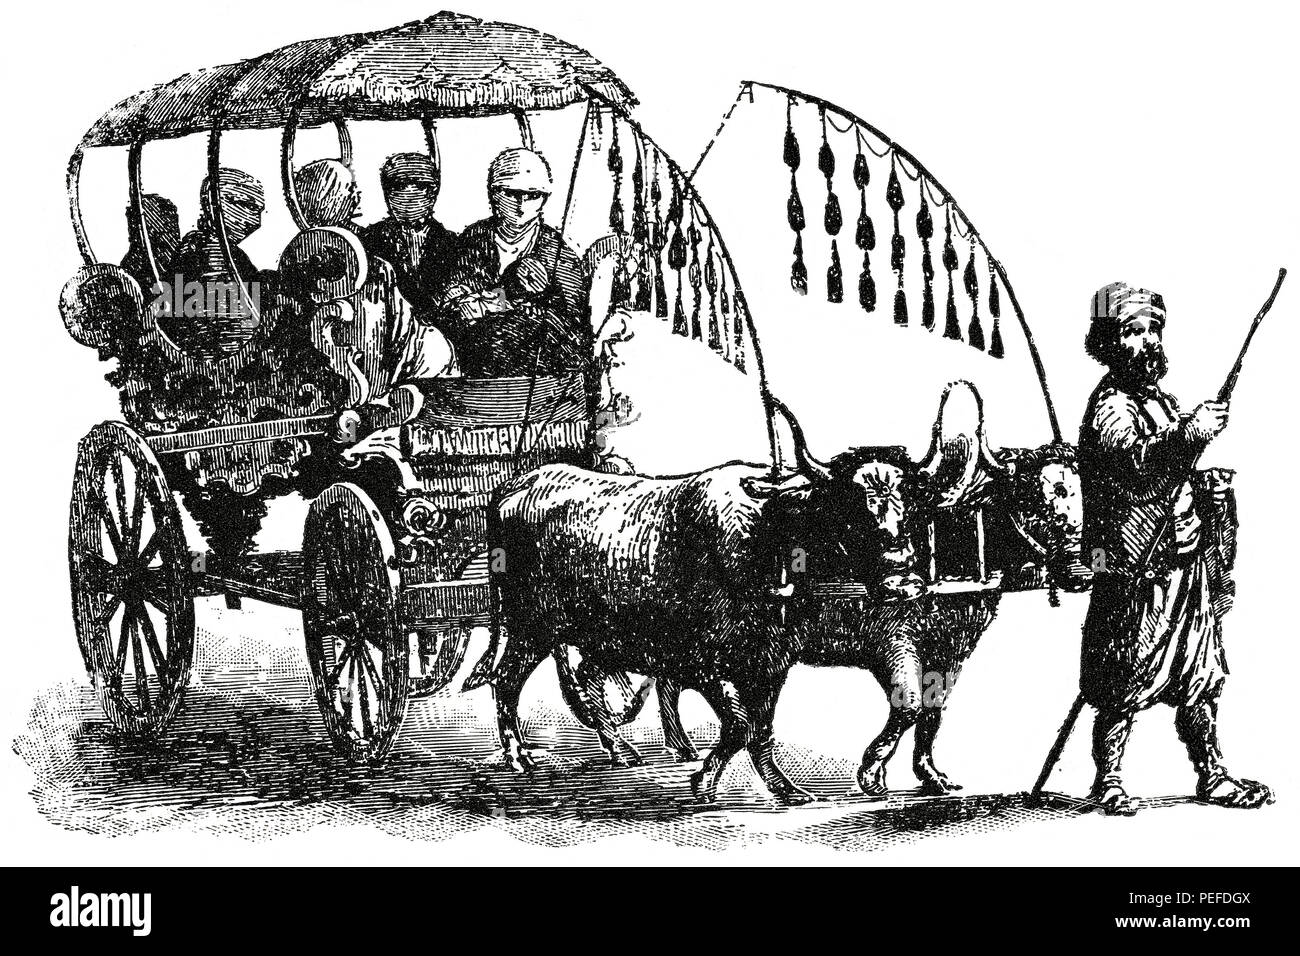 A Family “Araba” or Carriage, Syria, 1890's, Illustration, Classical Portfolio of Primitive Carriers, by Marshall M. Kirman, World Railway Publ. Co., Illustration, 1895 Stock Photo